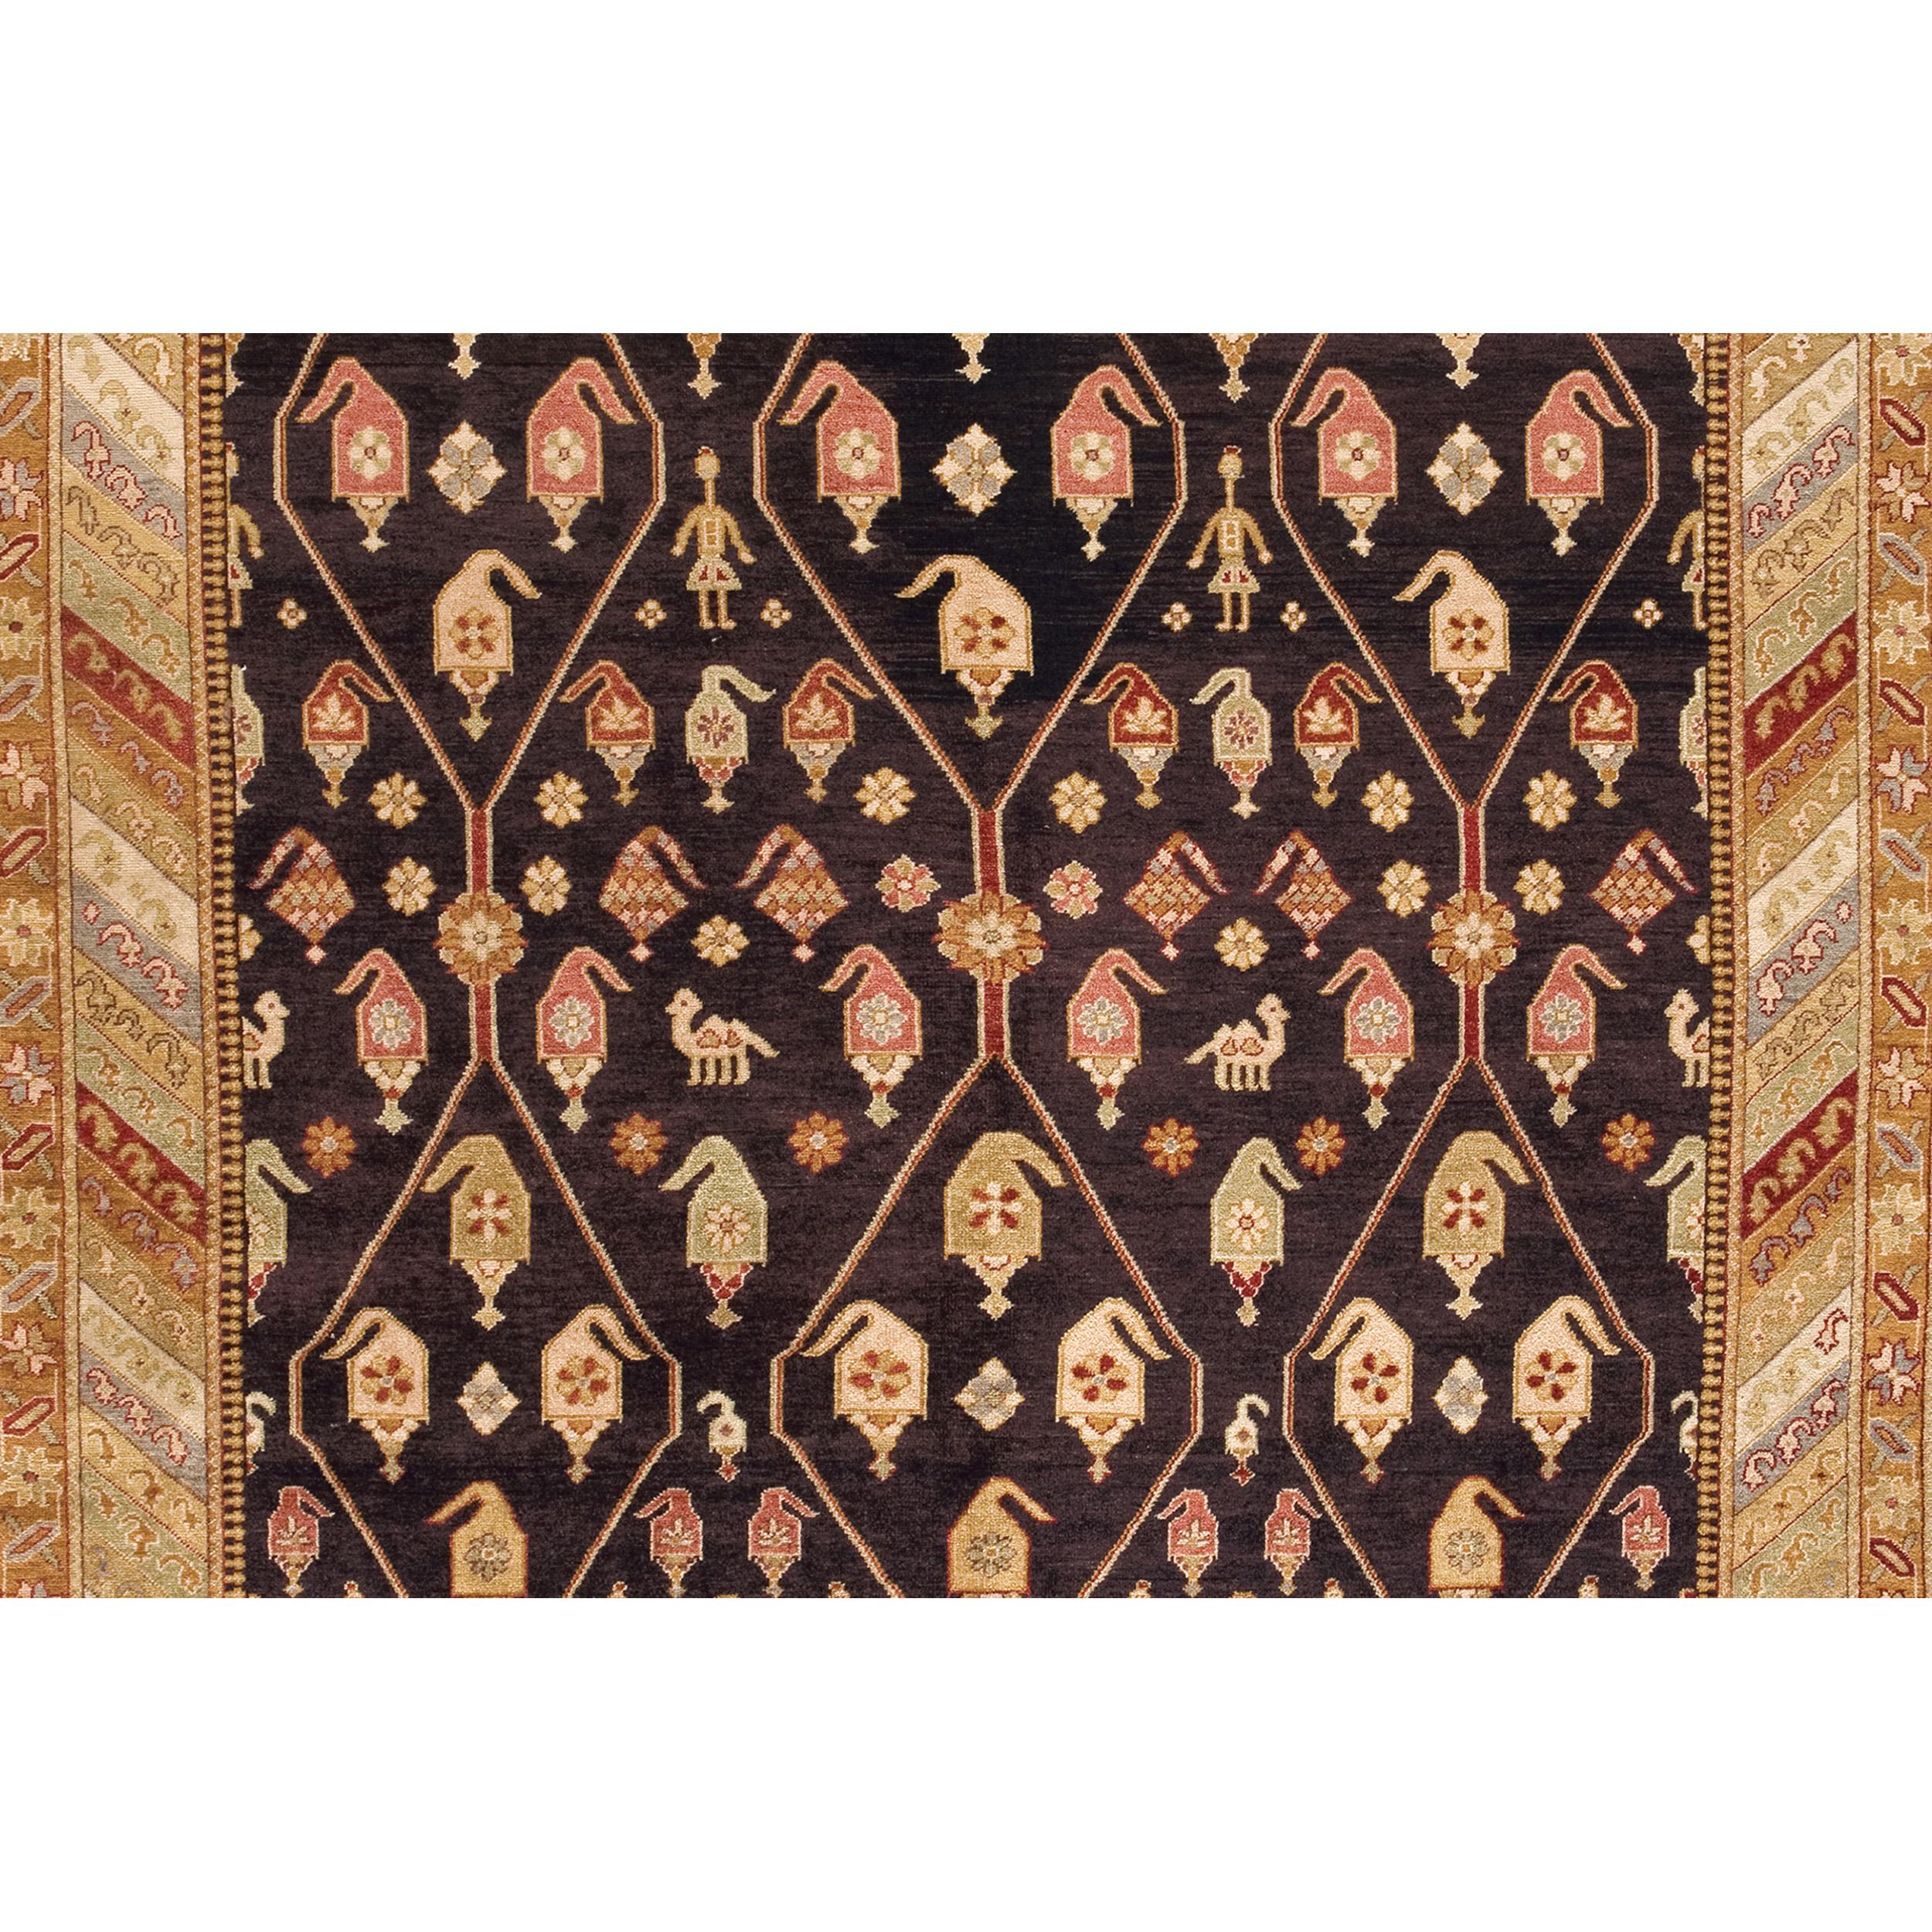 Luxury Traditional Hand-Knotted Brown/Gold 11x18 Rug In New Condition For Sale In Secaucus, NJ